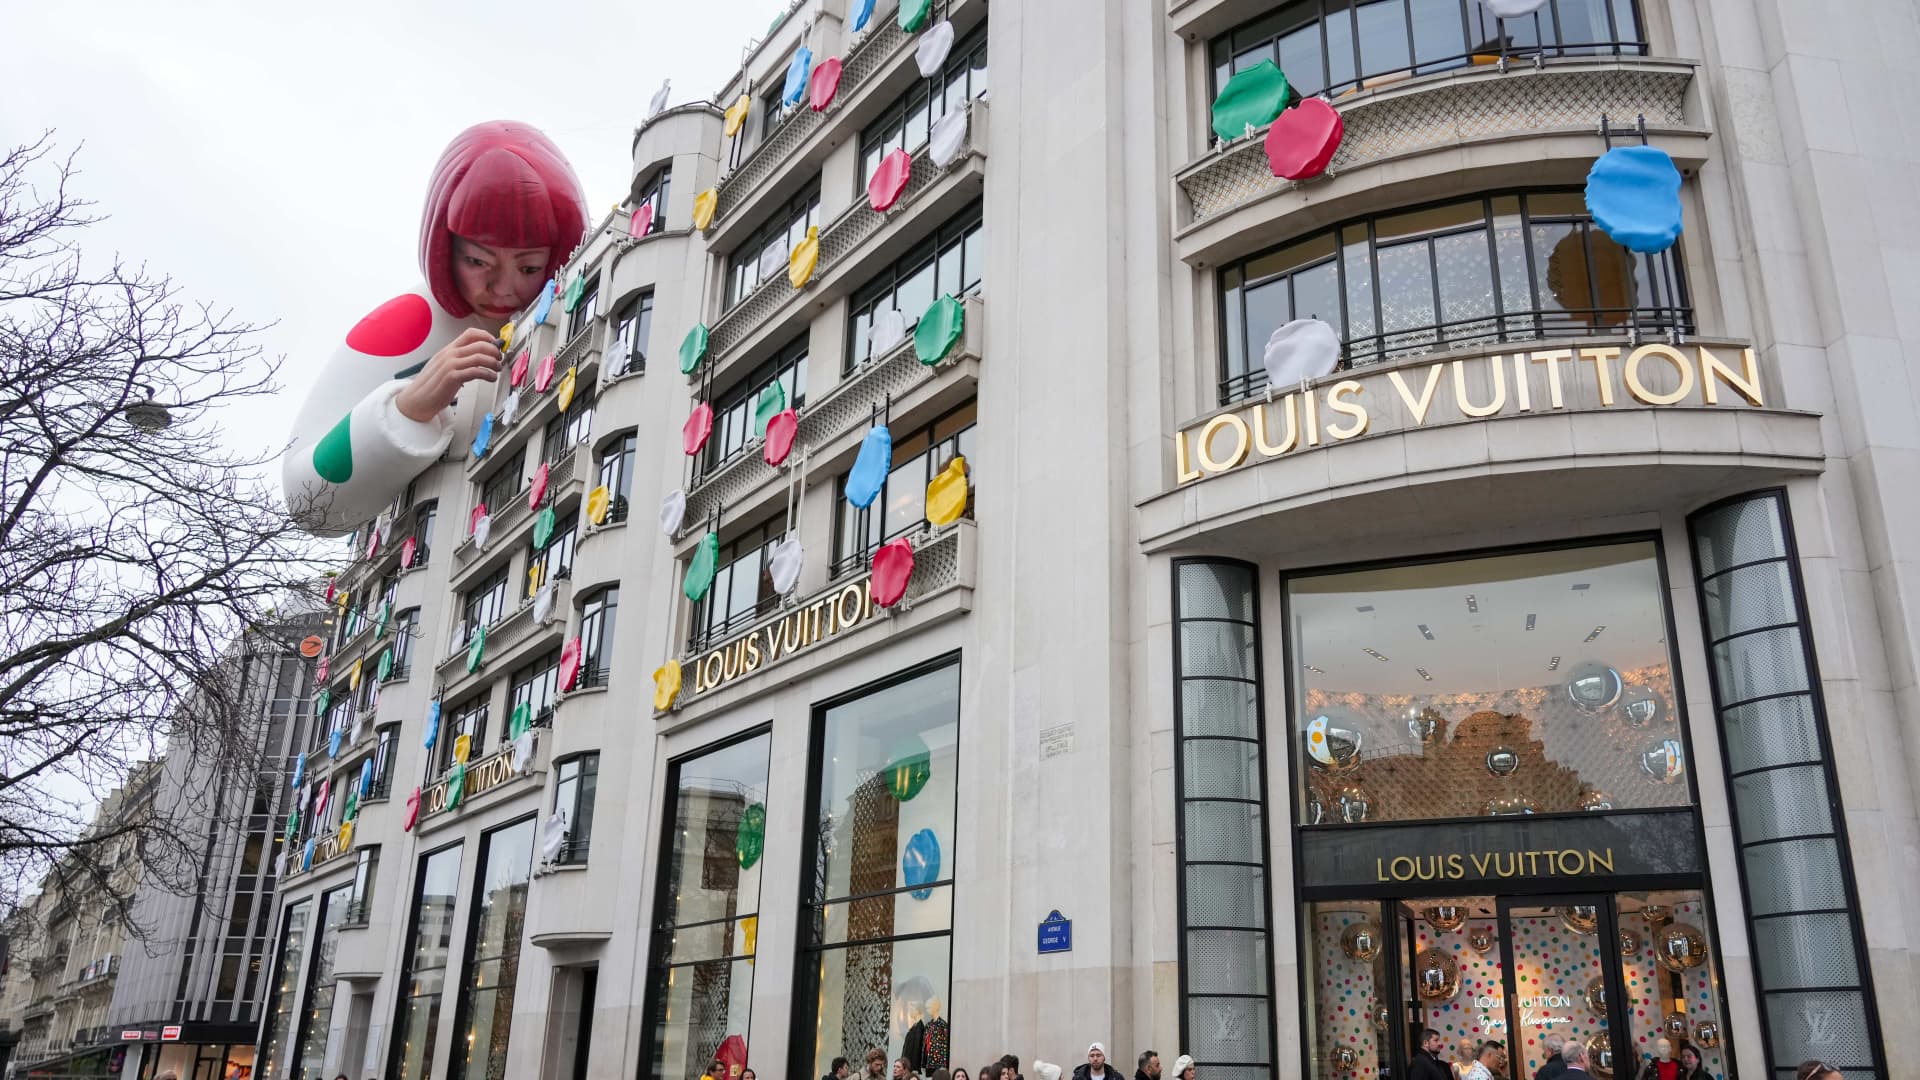 A Yayoi Kusama sculpture is displayed on the top of the Louis Vuitton's Champs Elysees store, on January 12, 2023 in Paris, France. This year the French Fashion house has launch a second collaboration with Yayoi Kusama.The first one was in 2012. The Yayoi Kusama x Louis Vuitton collection are now available in all Louis Vuitton's Stores Worldwide. (Photo by Edward Berthelot/Getty Images)